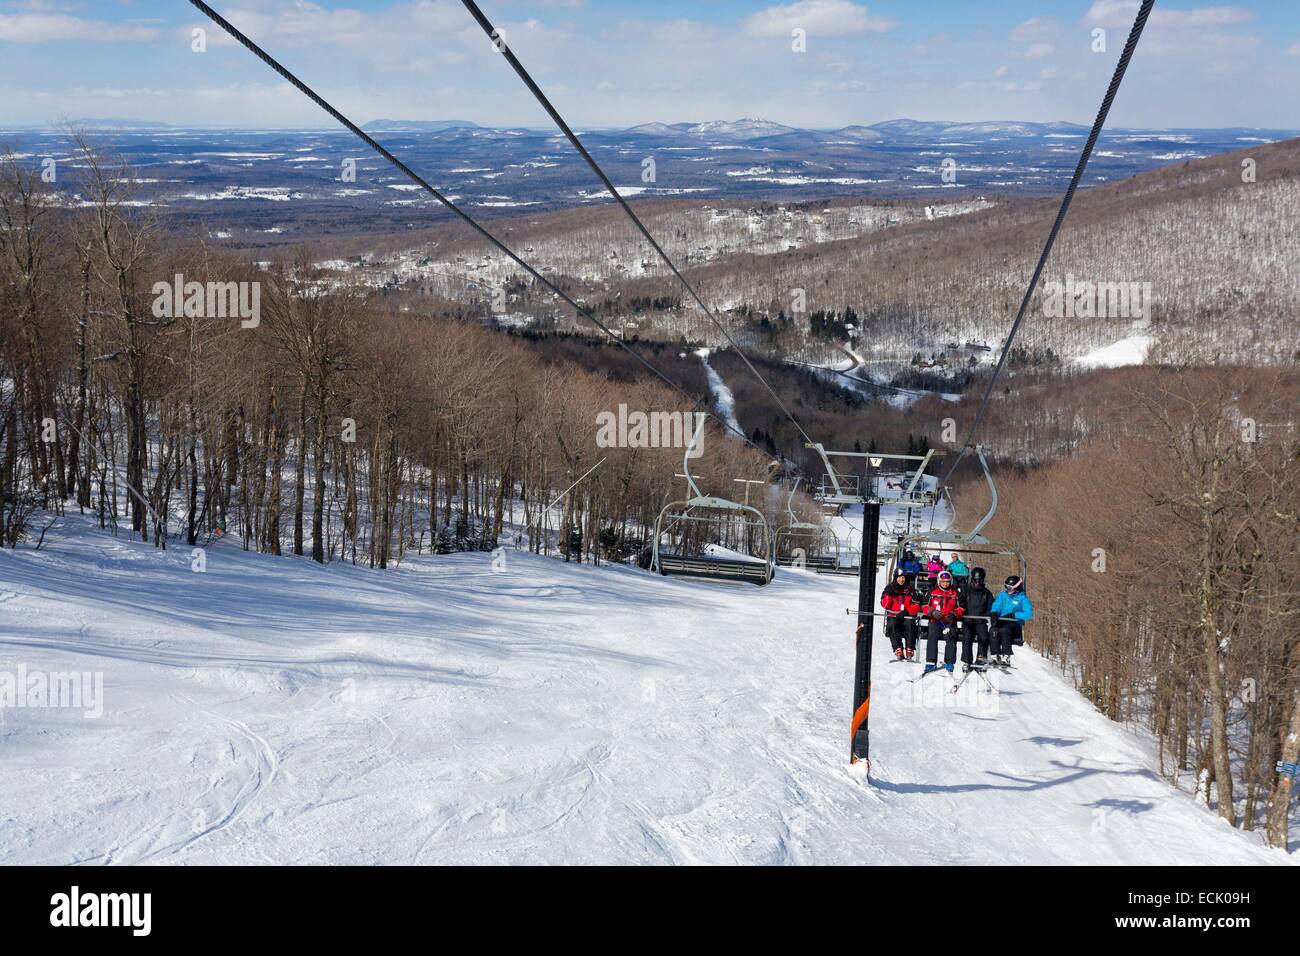 Canada, Quebec province, the region of the Eastern Townships, the village of Sutton, the ski resort, ski lifts Stock Photo